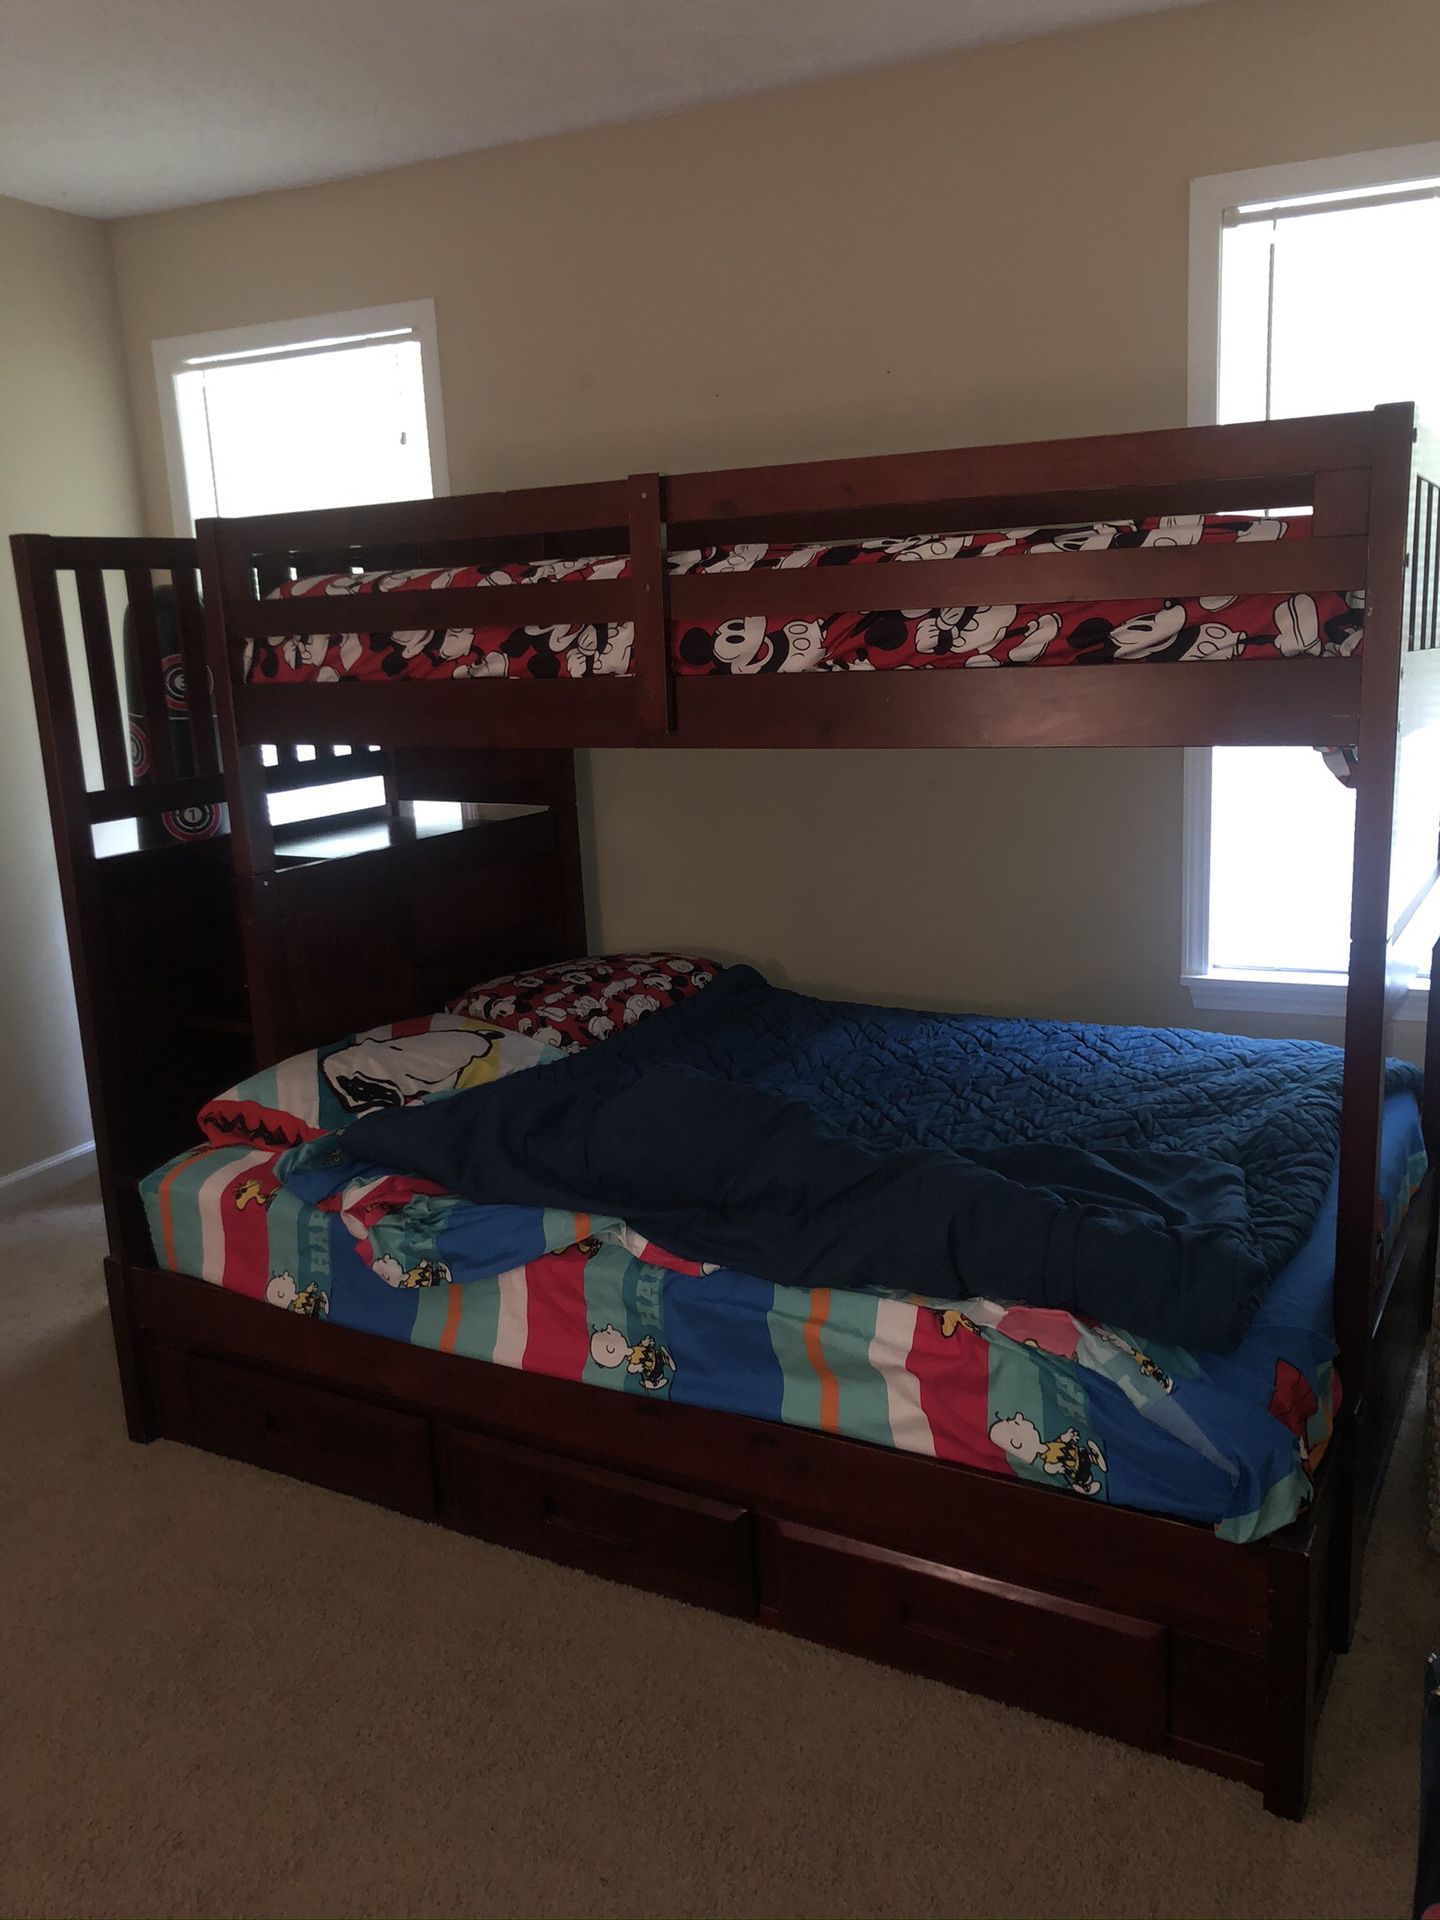 Cherry wood bunk beds with drawers & mattresses